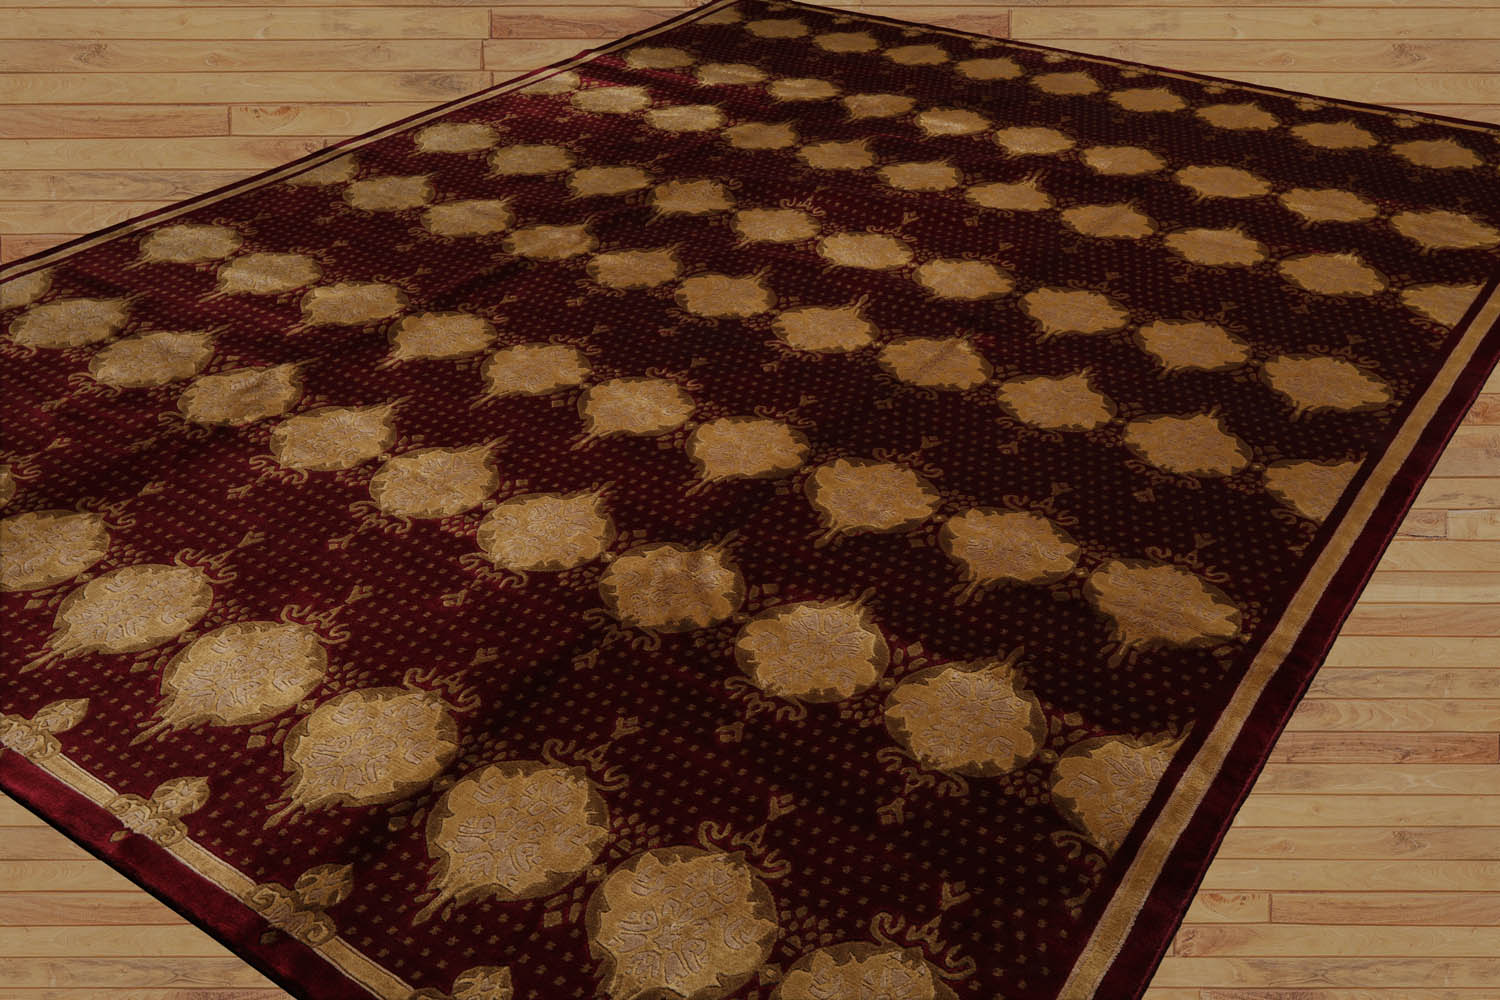 Smelley 9x12 Hand Knotted Savonnerie 100% Wool Traditional Oriental Area Rug Burgundy, Beige Color